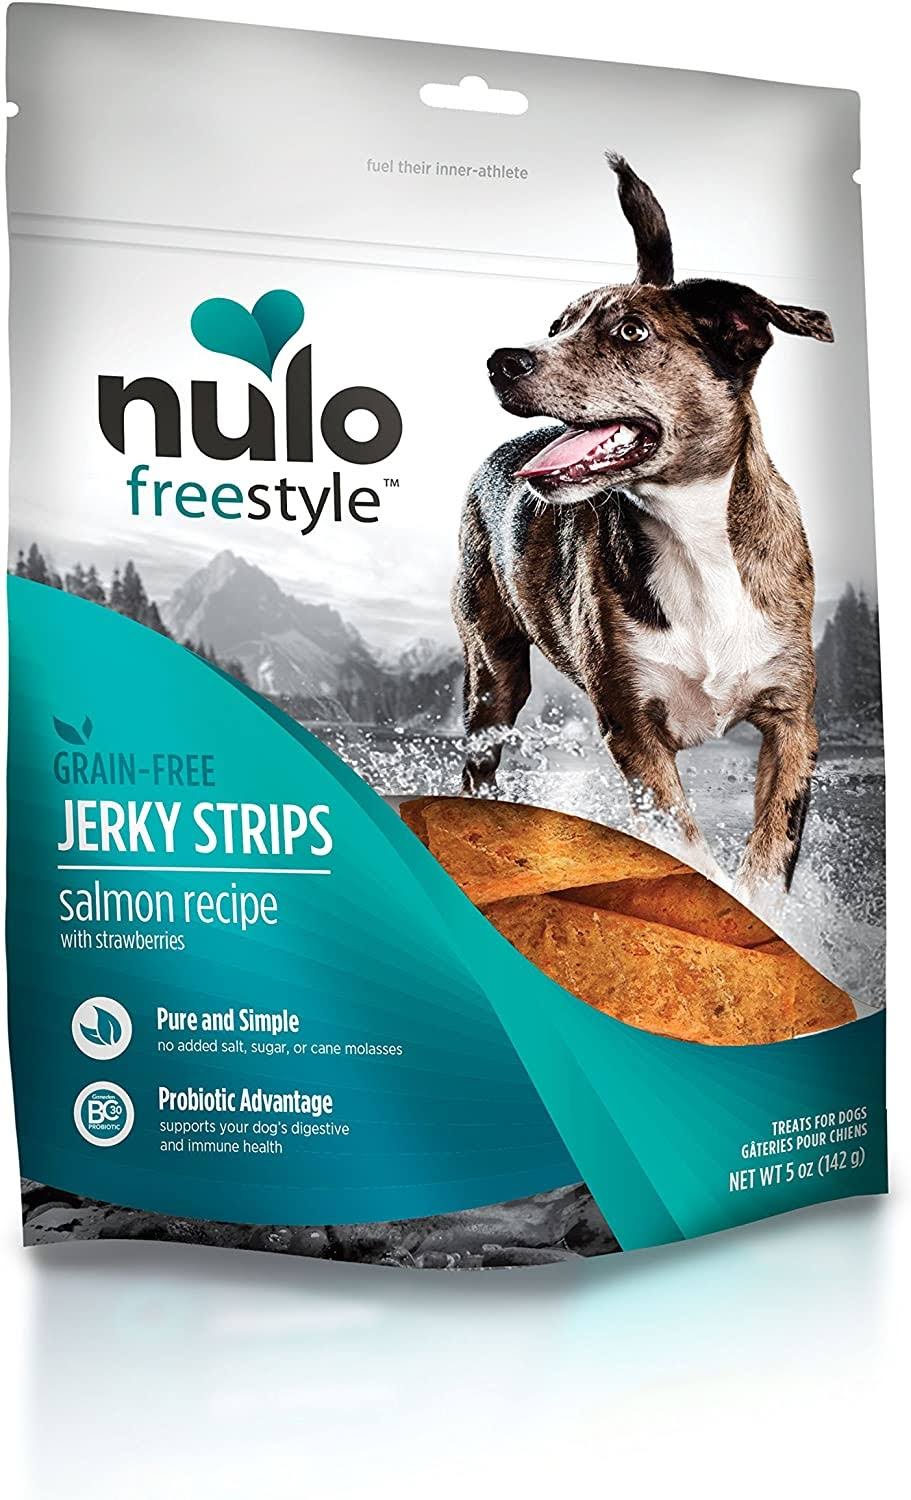 Nulo Freestyle Jerky Dog Treats: Healthy Grain Free Dog Treat - Natural Dog Treats For Training or Reward - Real Meat Jerky Strips For Puppy And Adult